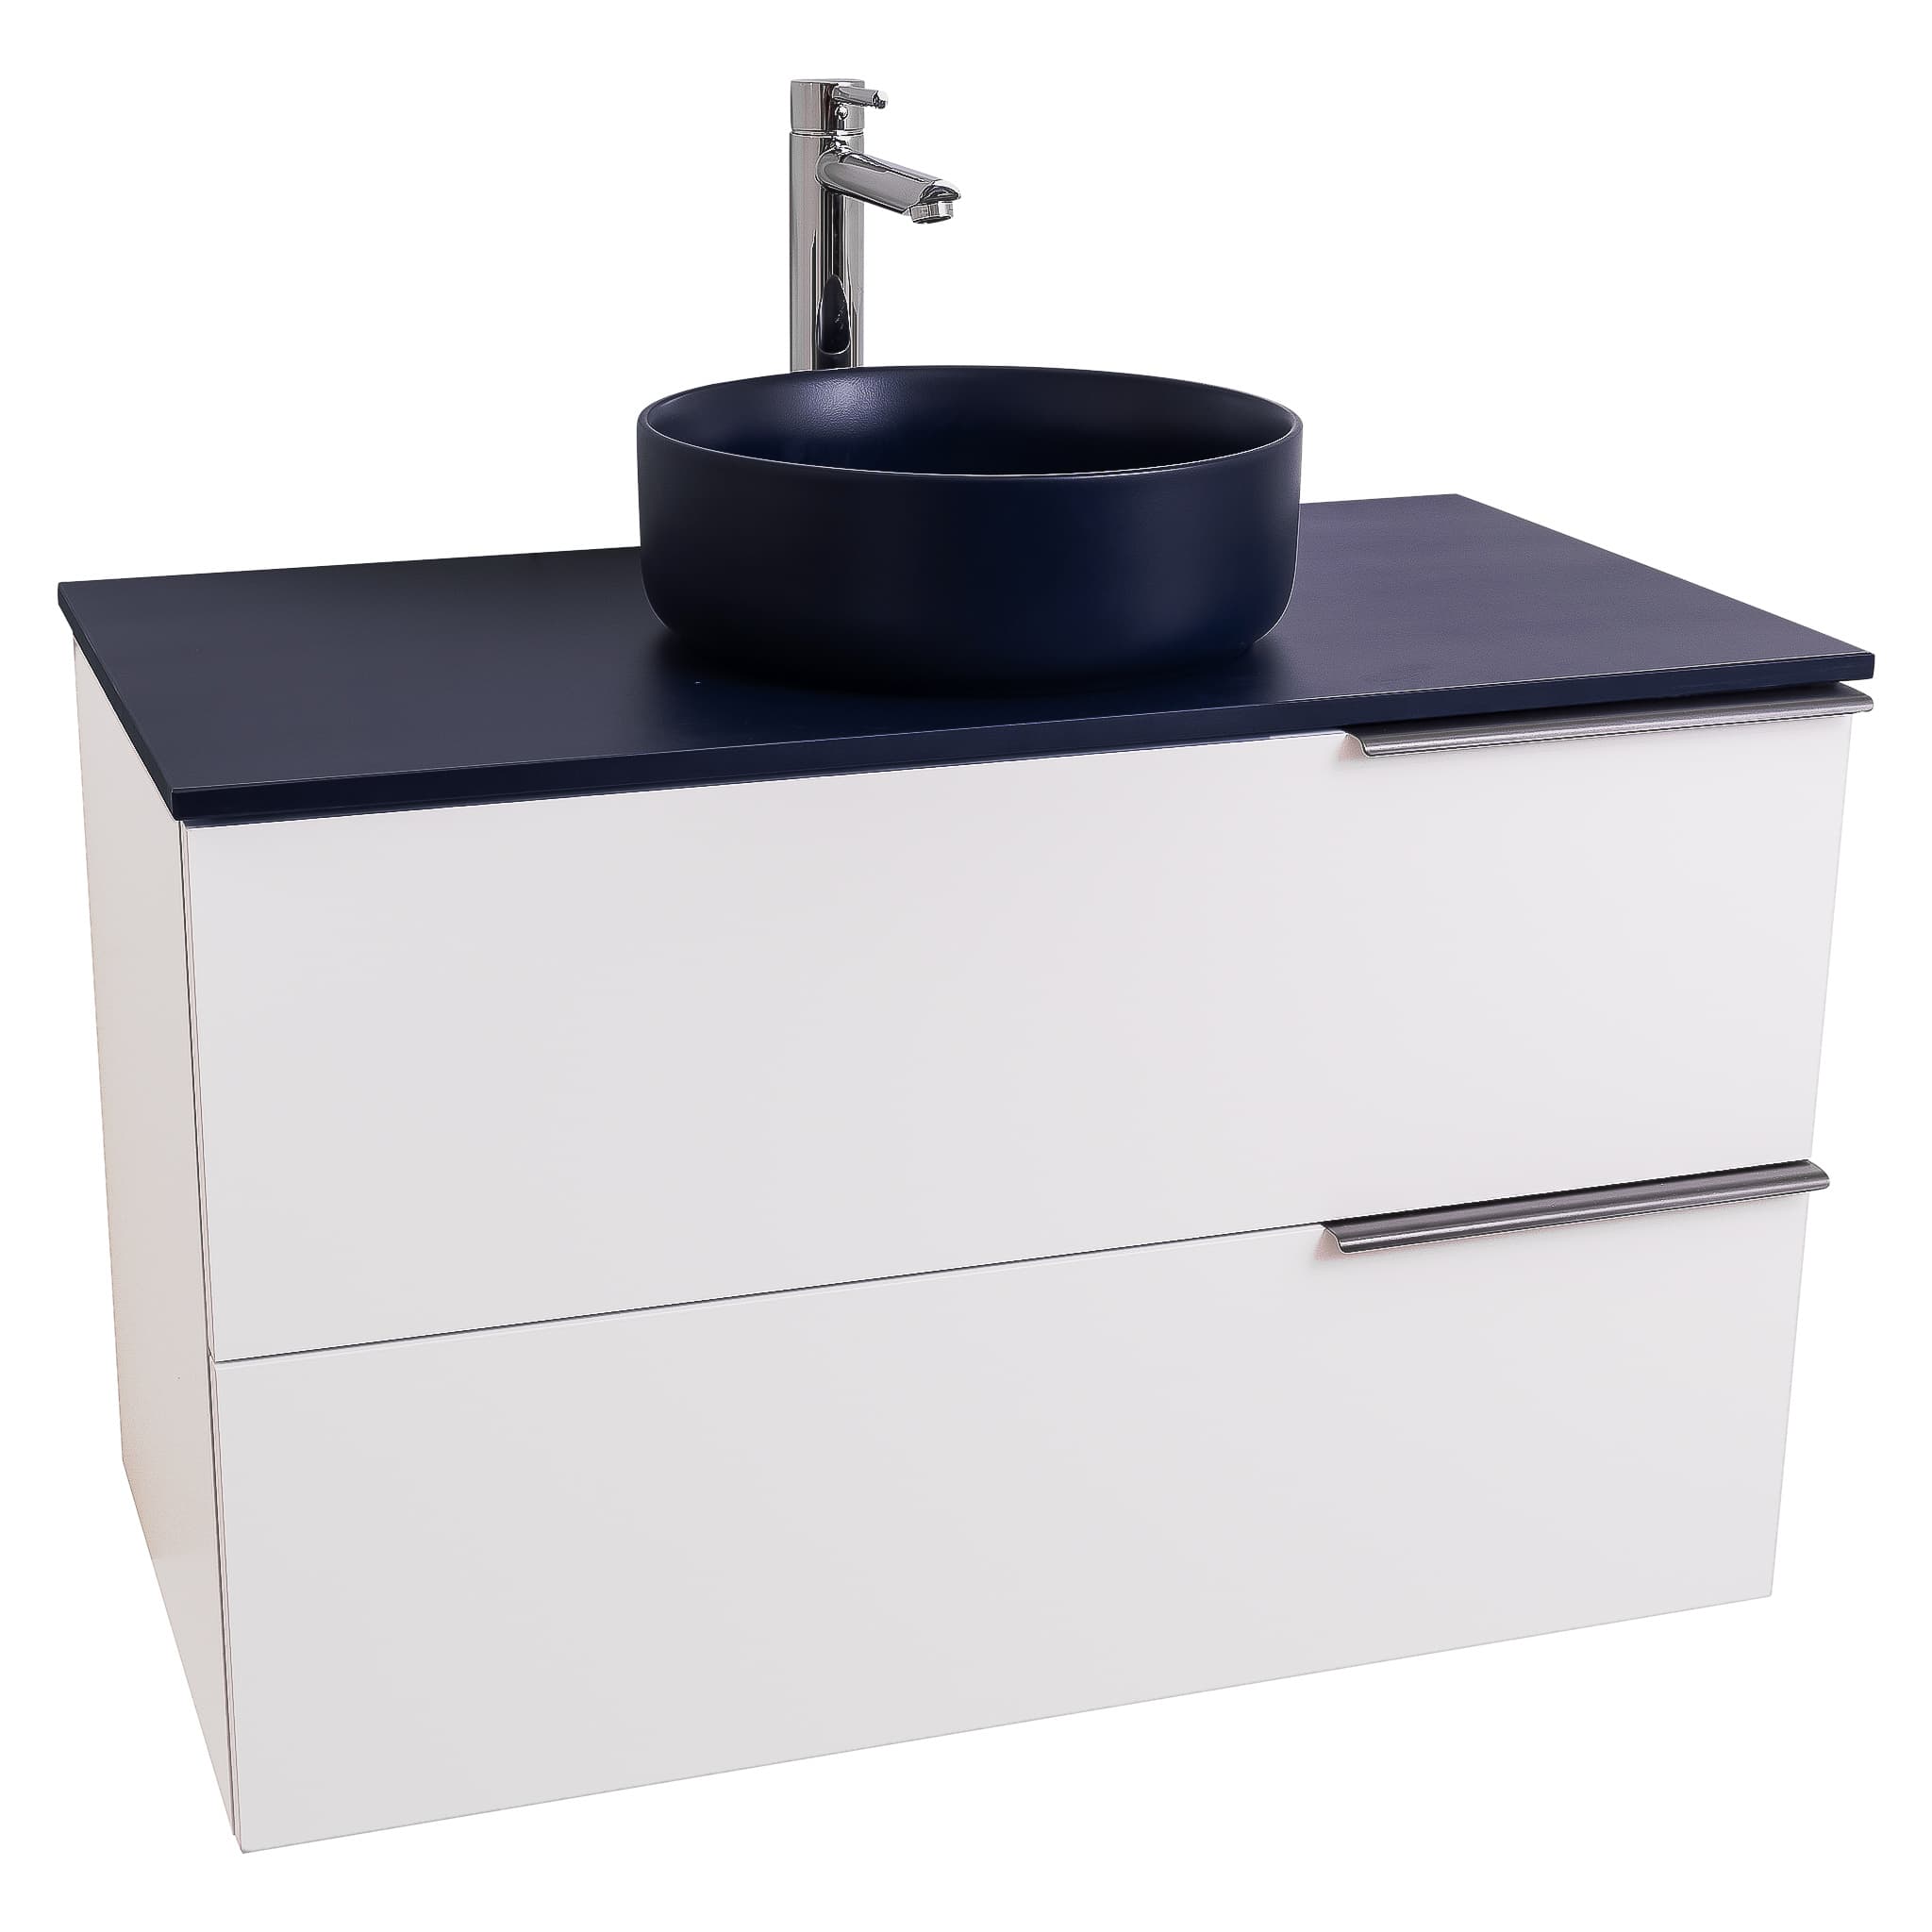 Mallorca 35.5 Matte White Cabinet, Ares Navy Blue Top And Ares Navy Blue Ceramic Basin, Wall Mounted Modern Vanity Set